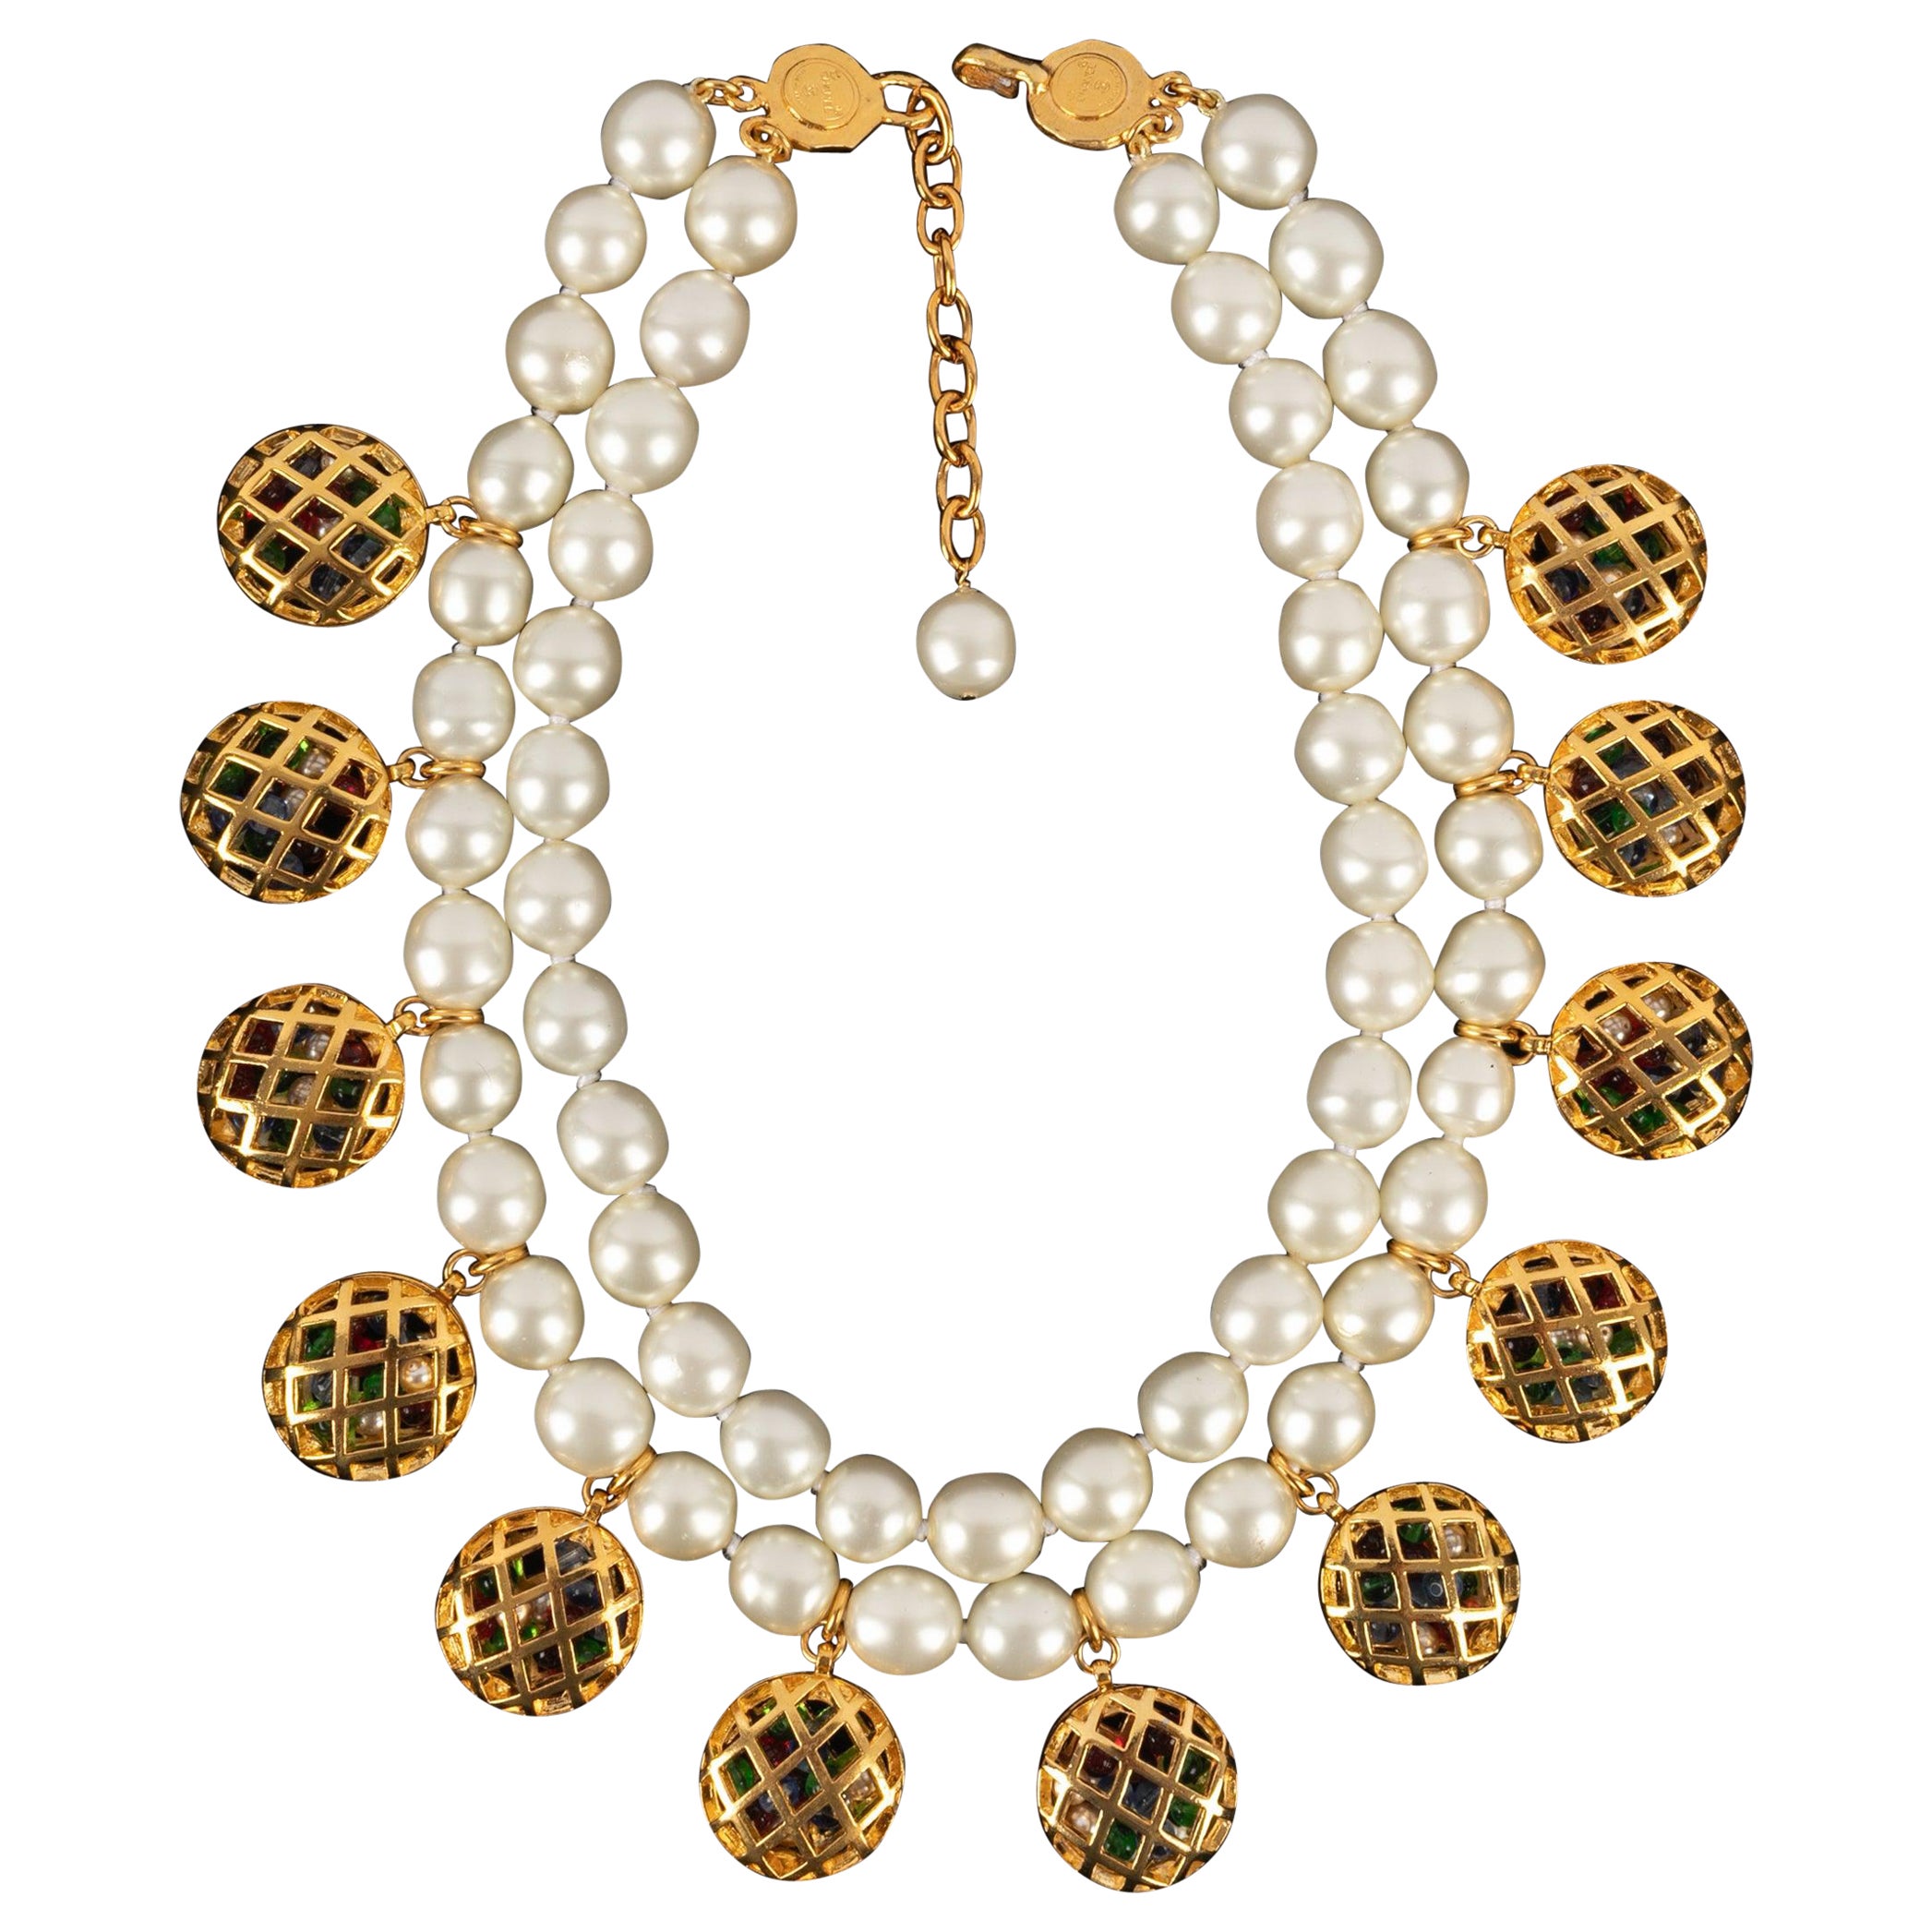 Chanel "Cages" Necklace with Openwork Golden Metal Charms For Sale